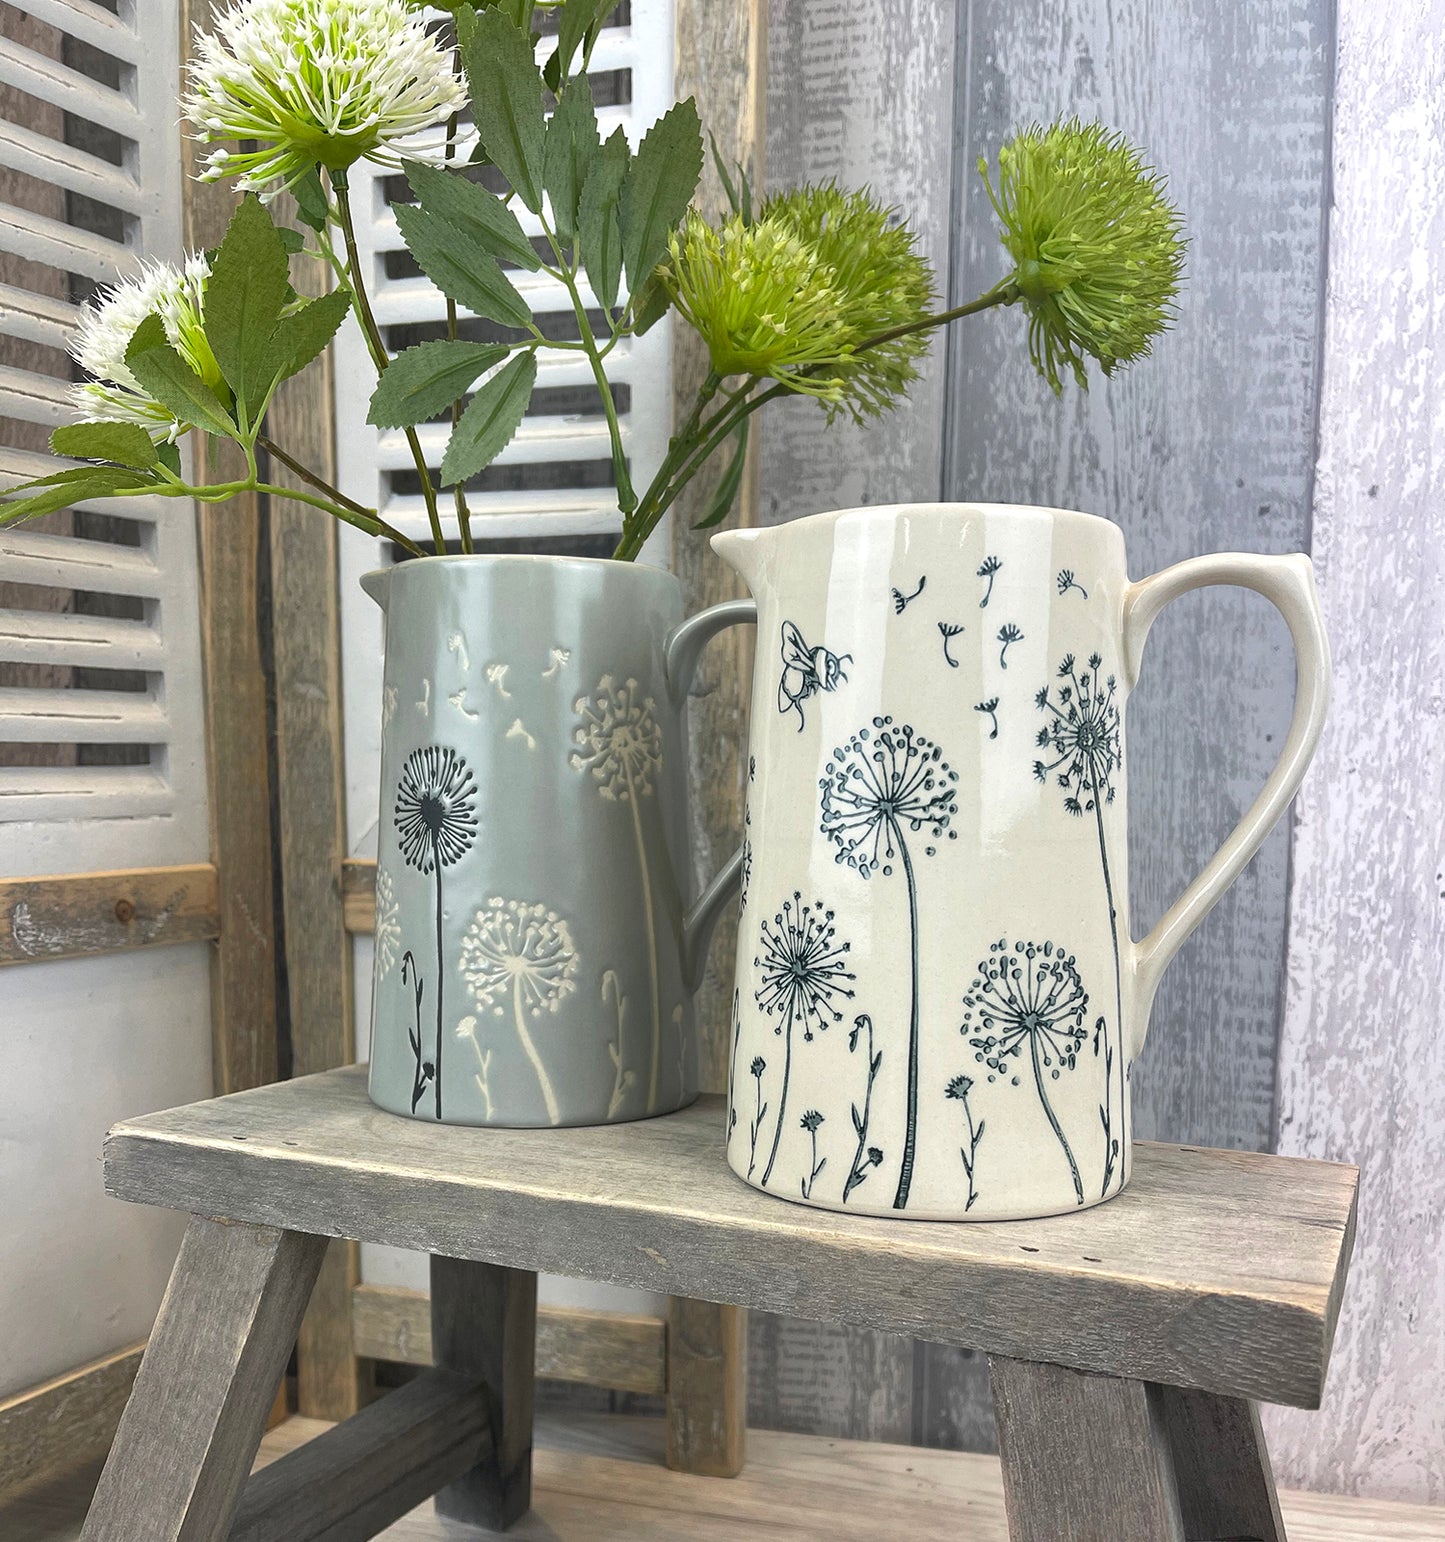 The Dandelion Collection - 6 products available